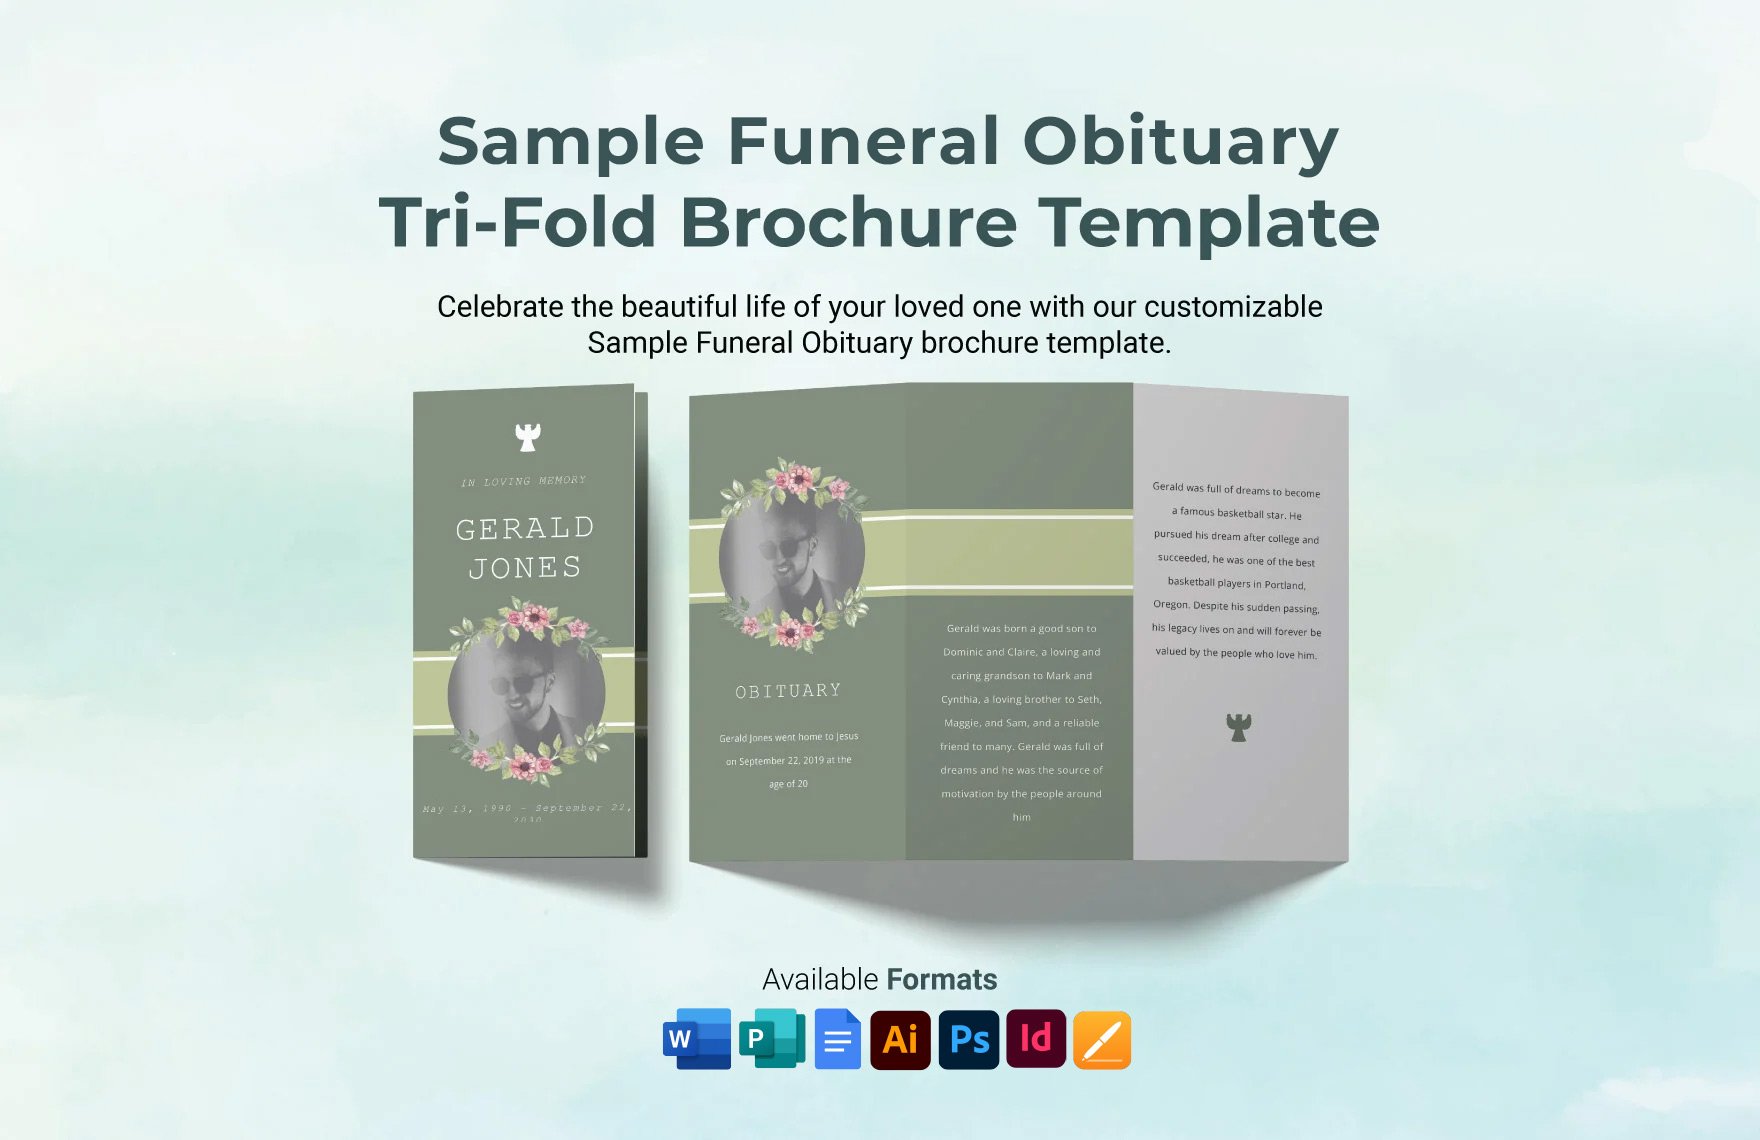 Free Sample Funeral Obituary Tri-Fold Brochure Template in Word, Google Docs, Illustrator, PSD, Apple Pages, Publisher, InDesign